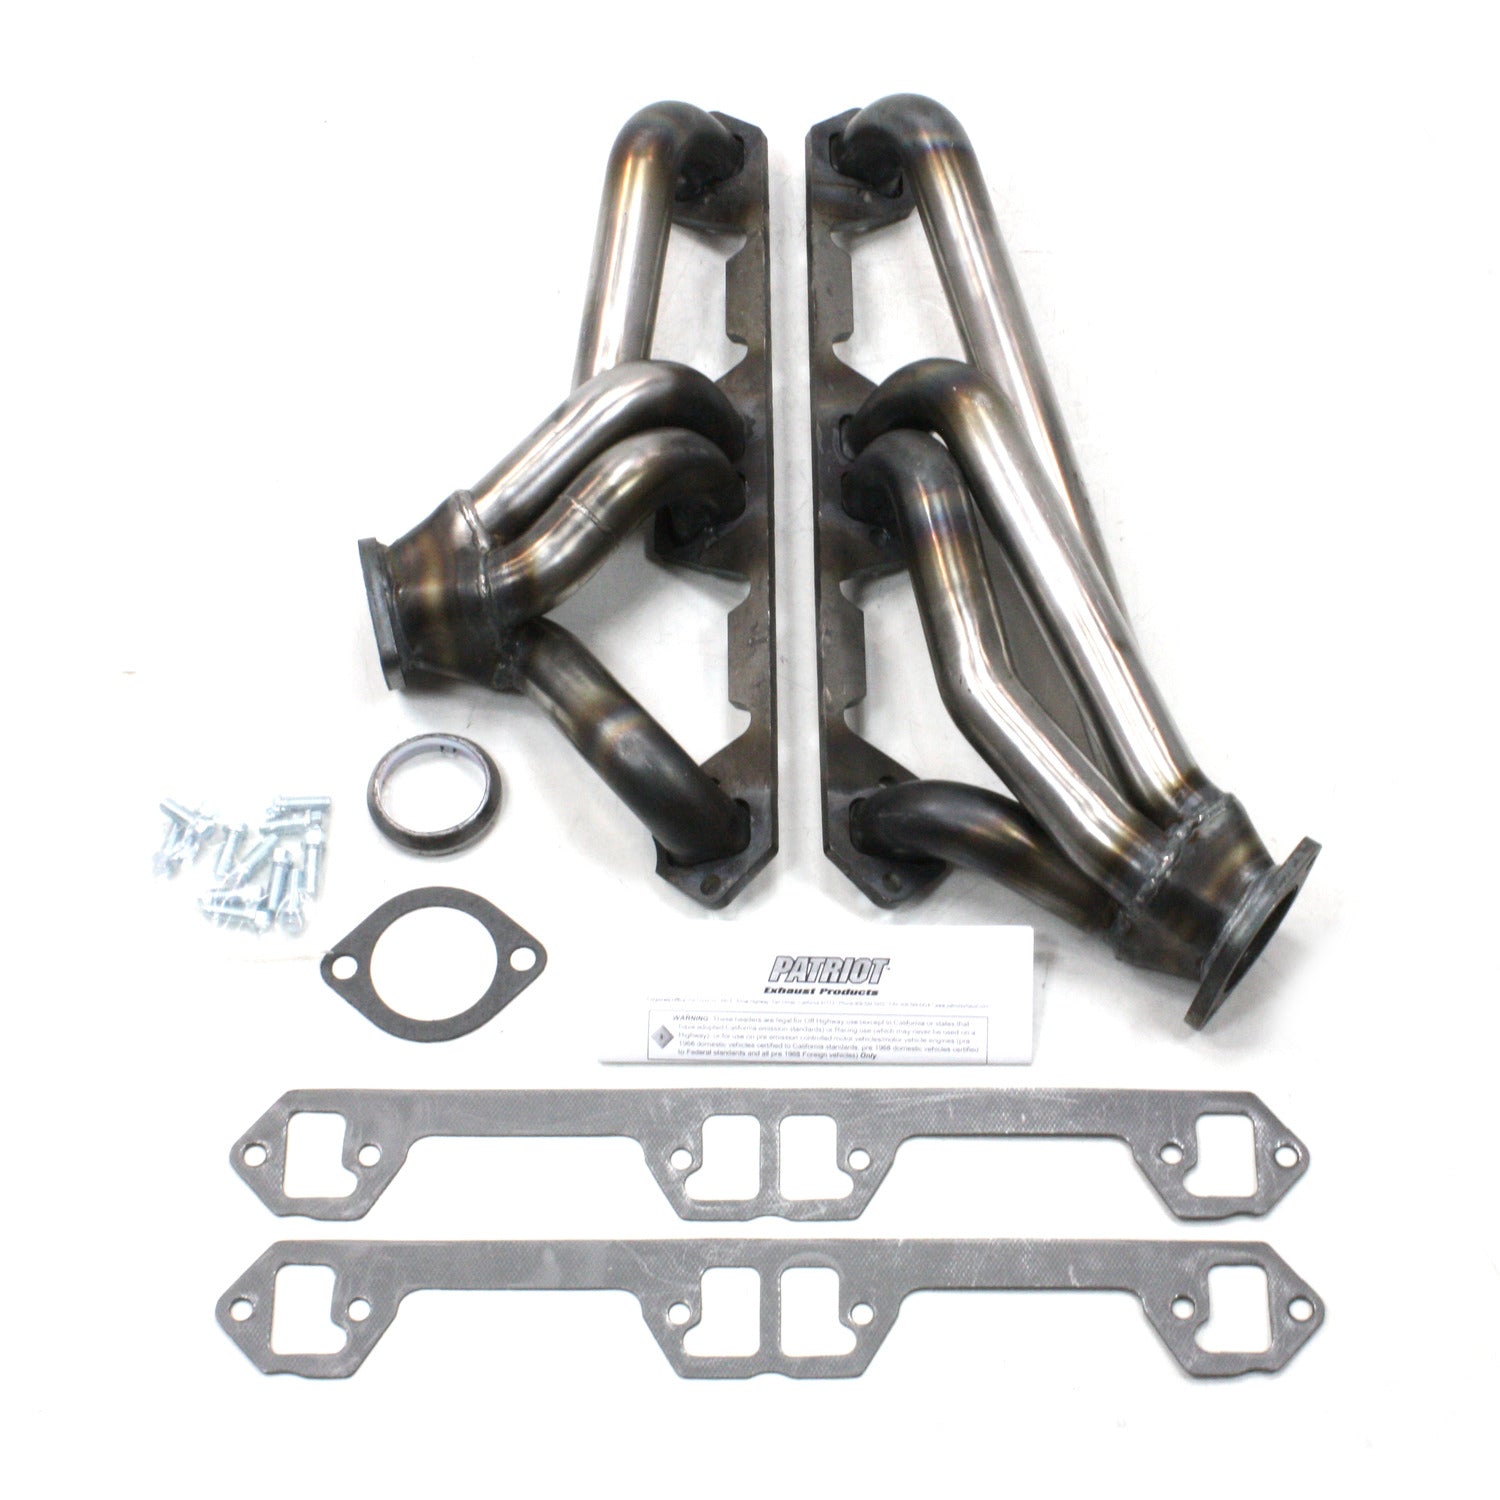 Patriot Exhaust H8600 1 5/8" Clippster Direct Replacement  Header with dog leg ports 68-70 AMX, Javelin, Rebel, Ambassador 290-390 71-74 Javelin, Rebel, Ambassador 304-401 72-79 CJ5,7,8, Cherokee, Wagoneer, J10, J20 81-91 Cherokee, Grand Wagoneer, J10, J2